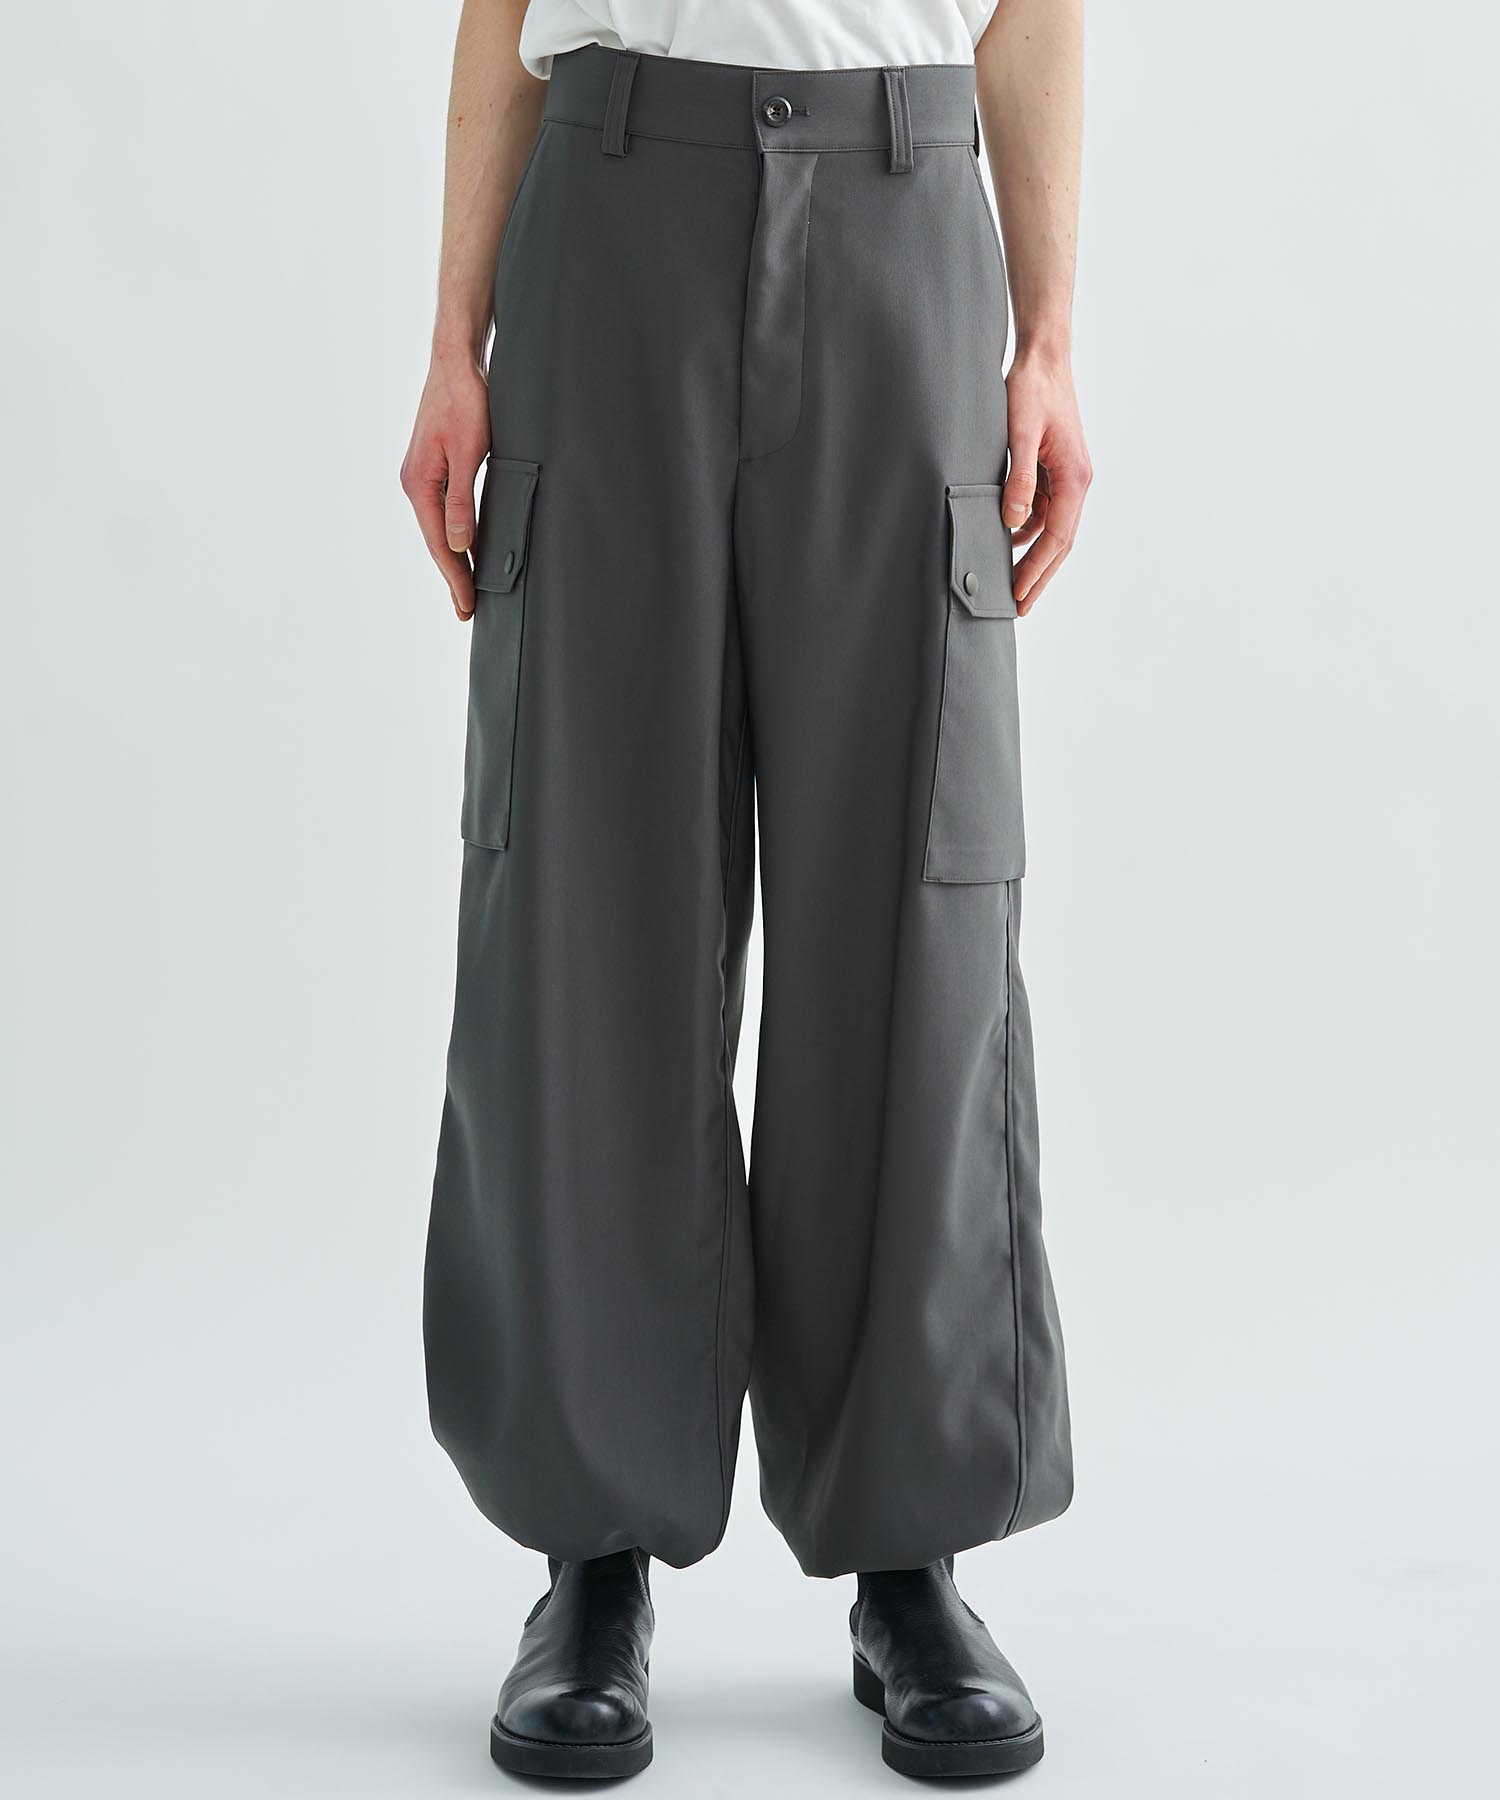 the reracs french army f2 cargo pants-